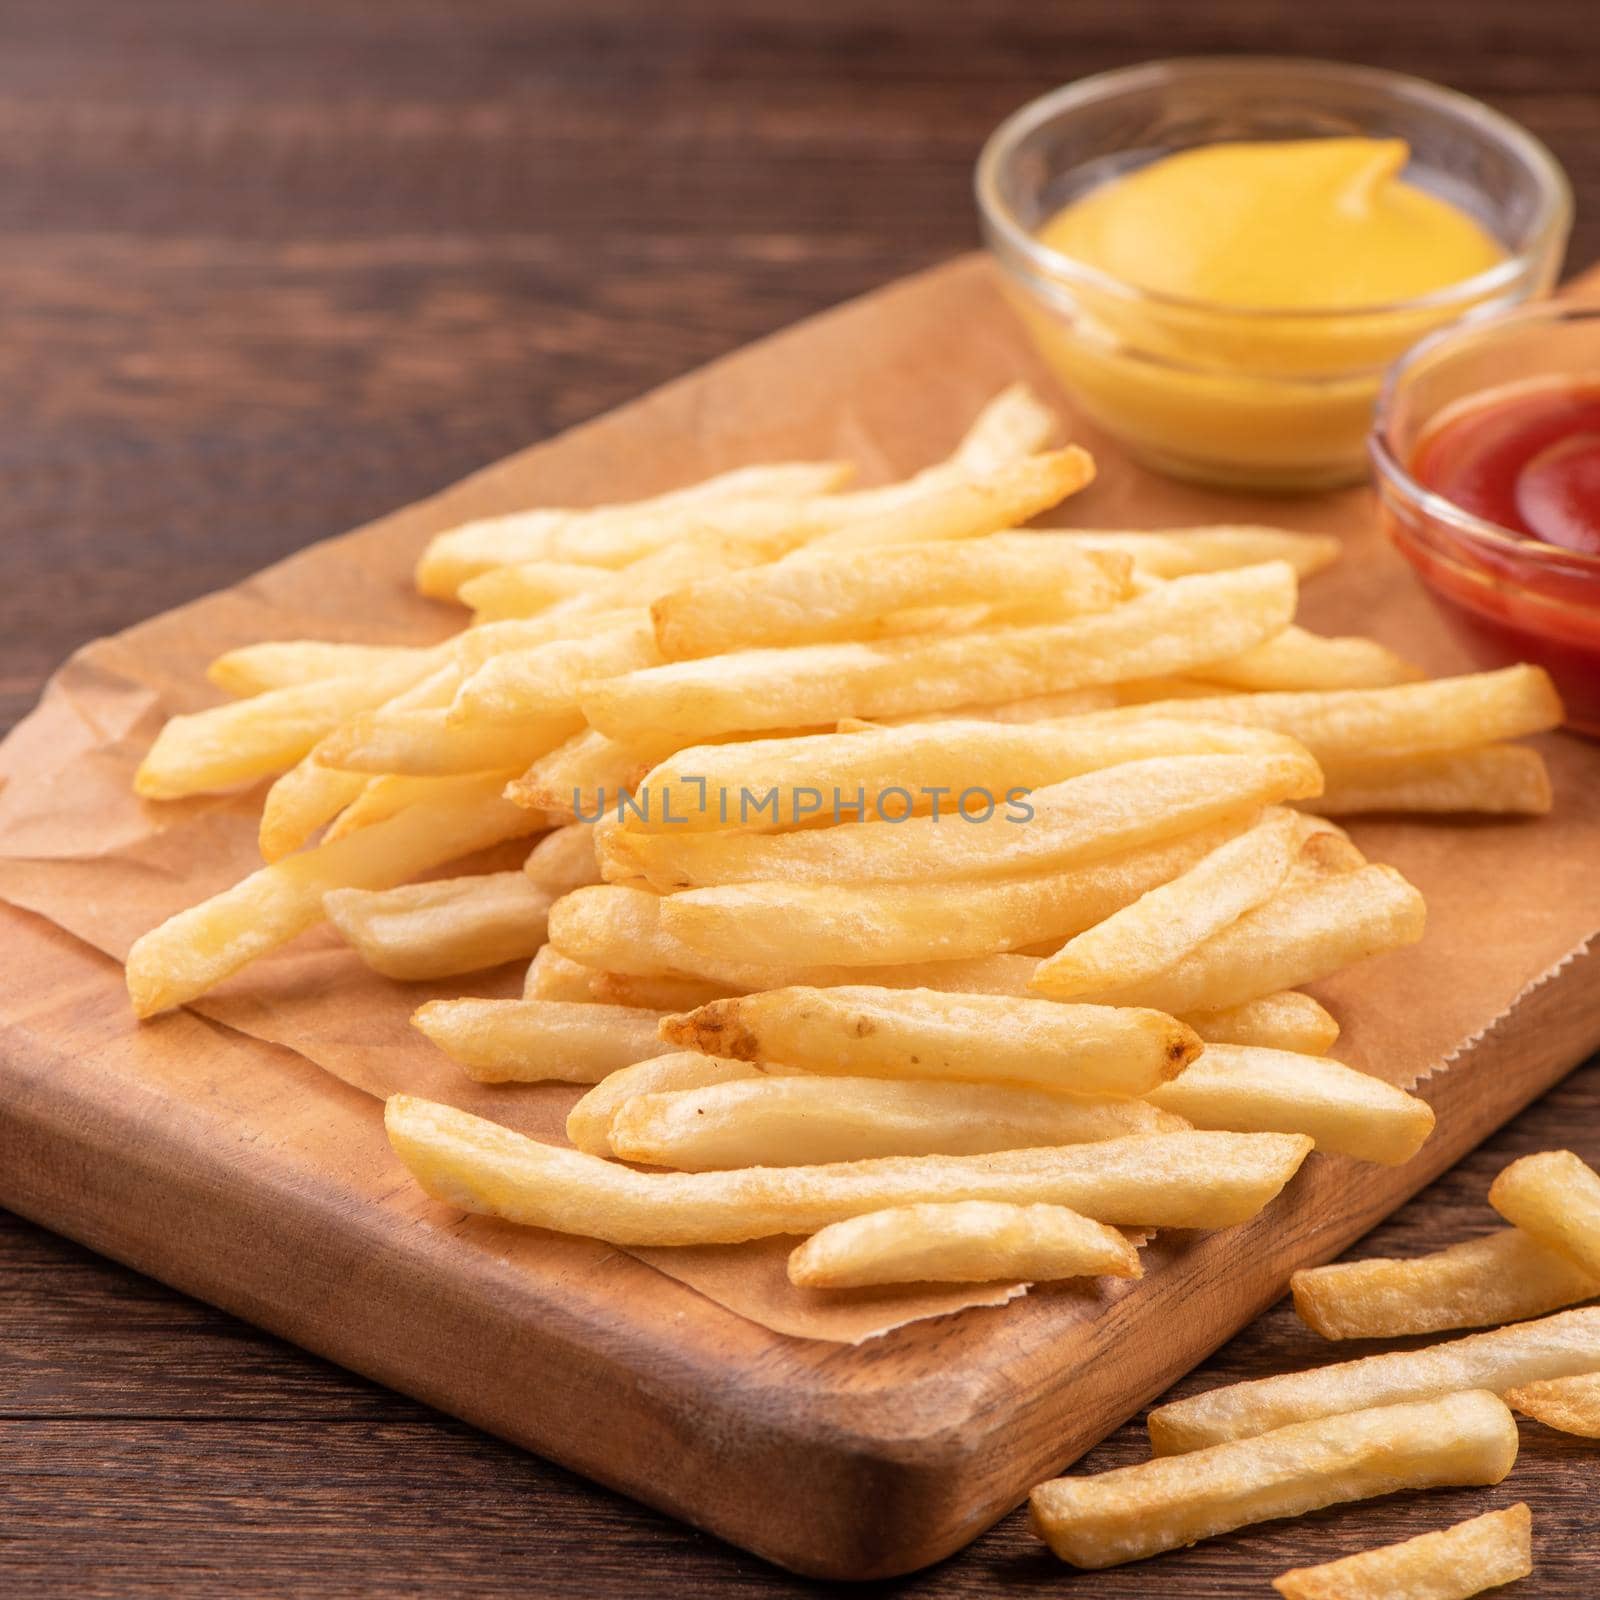 Golden yummy deep French fries on kraft baking sheet paper and serving tray to eat with ketchup and yellow mustard, top view, lifestyle.